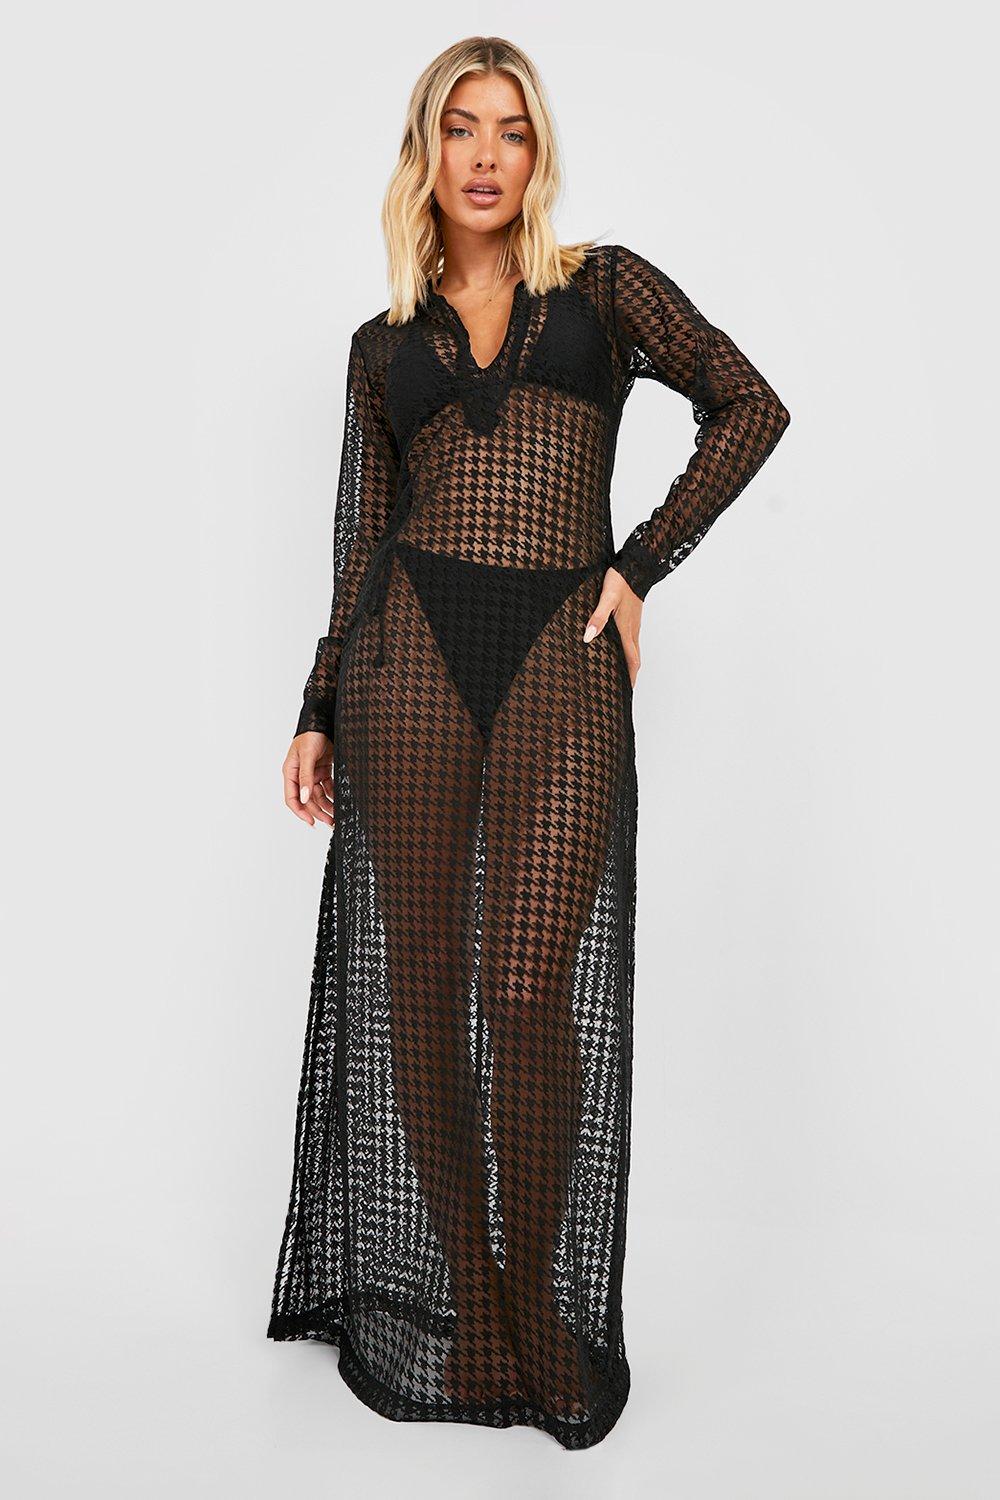 Dogtooth Lace Beach Cover-up Maxi Dress